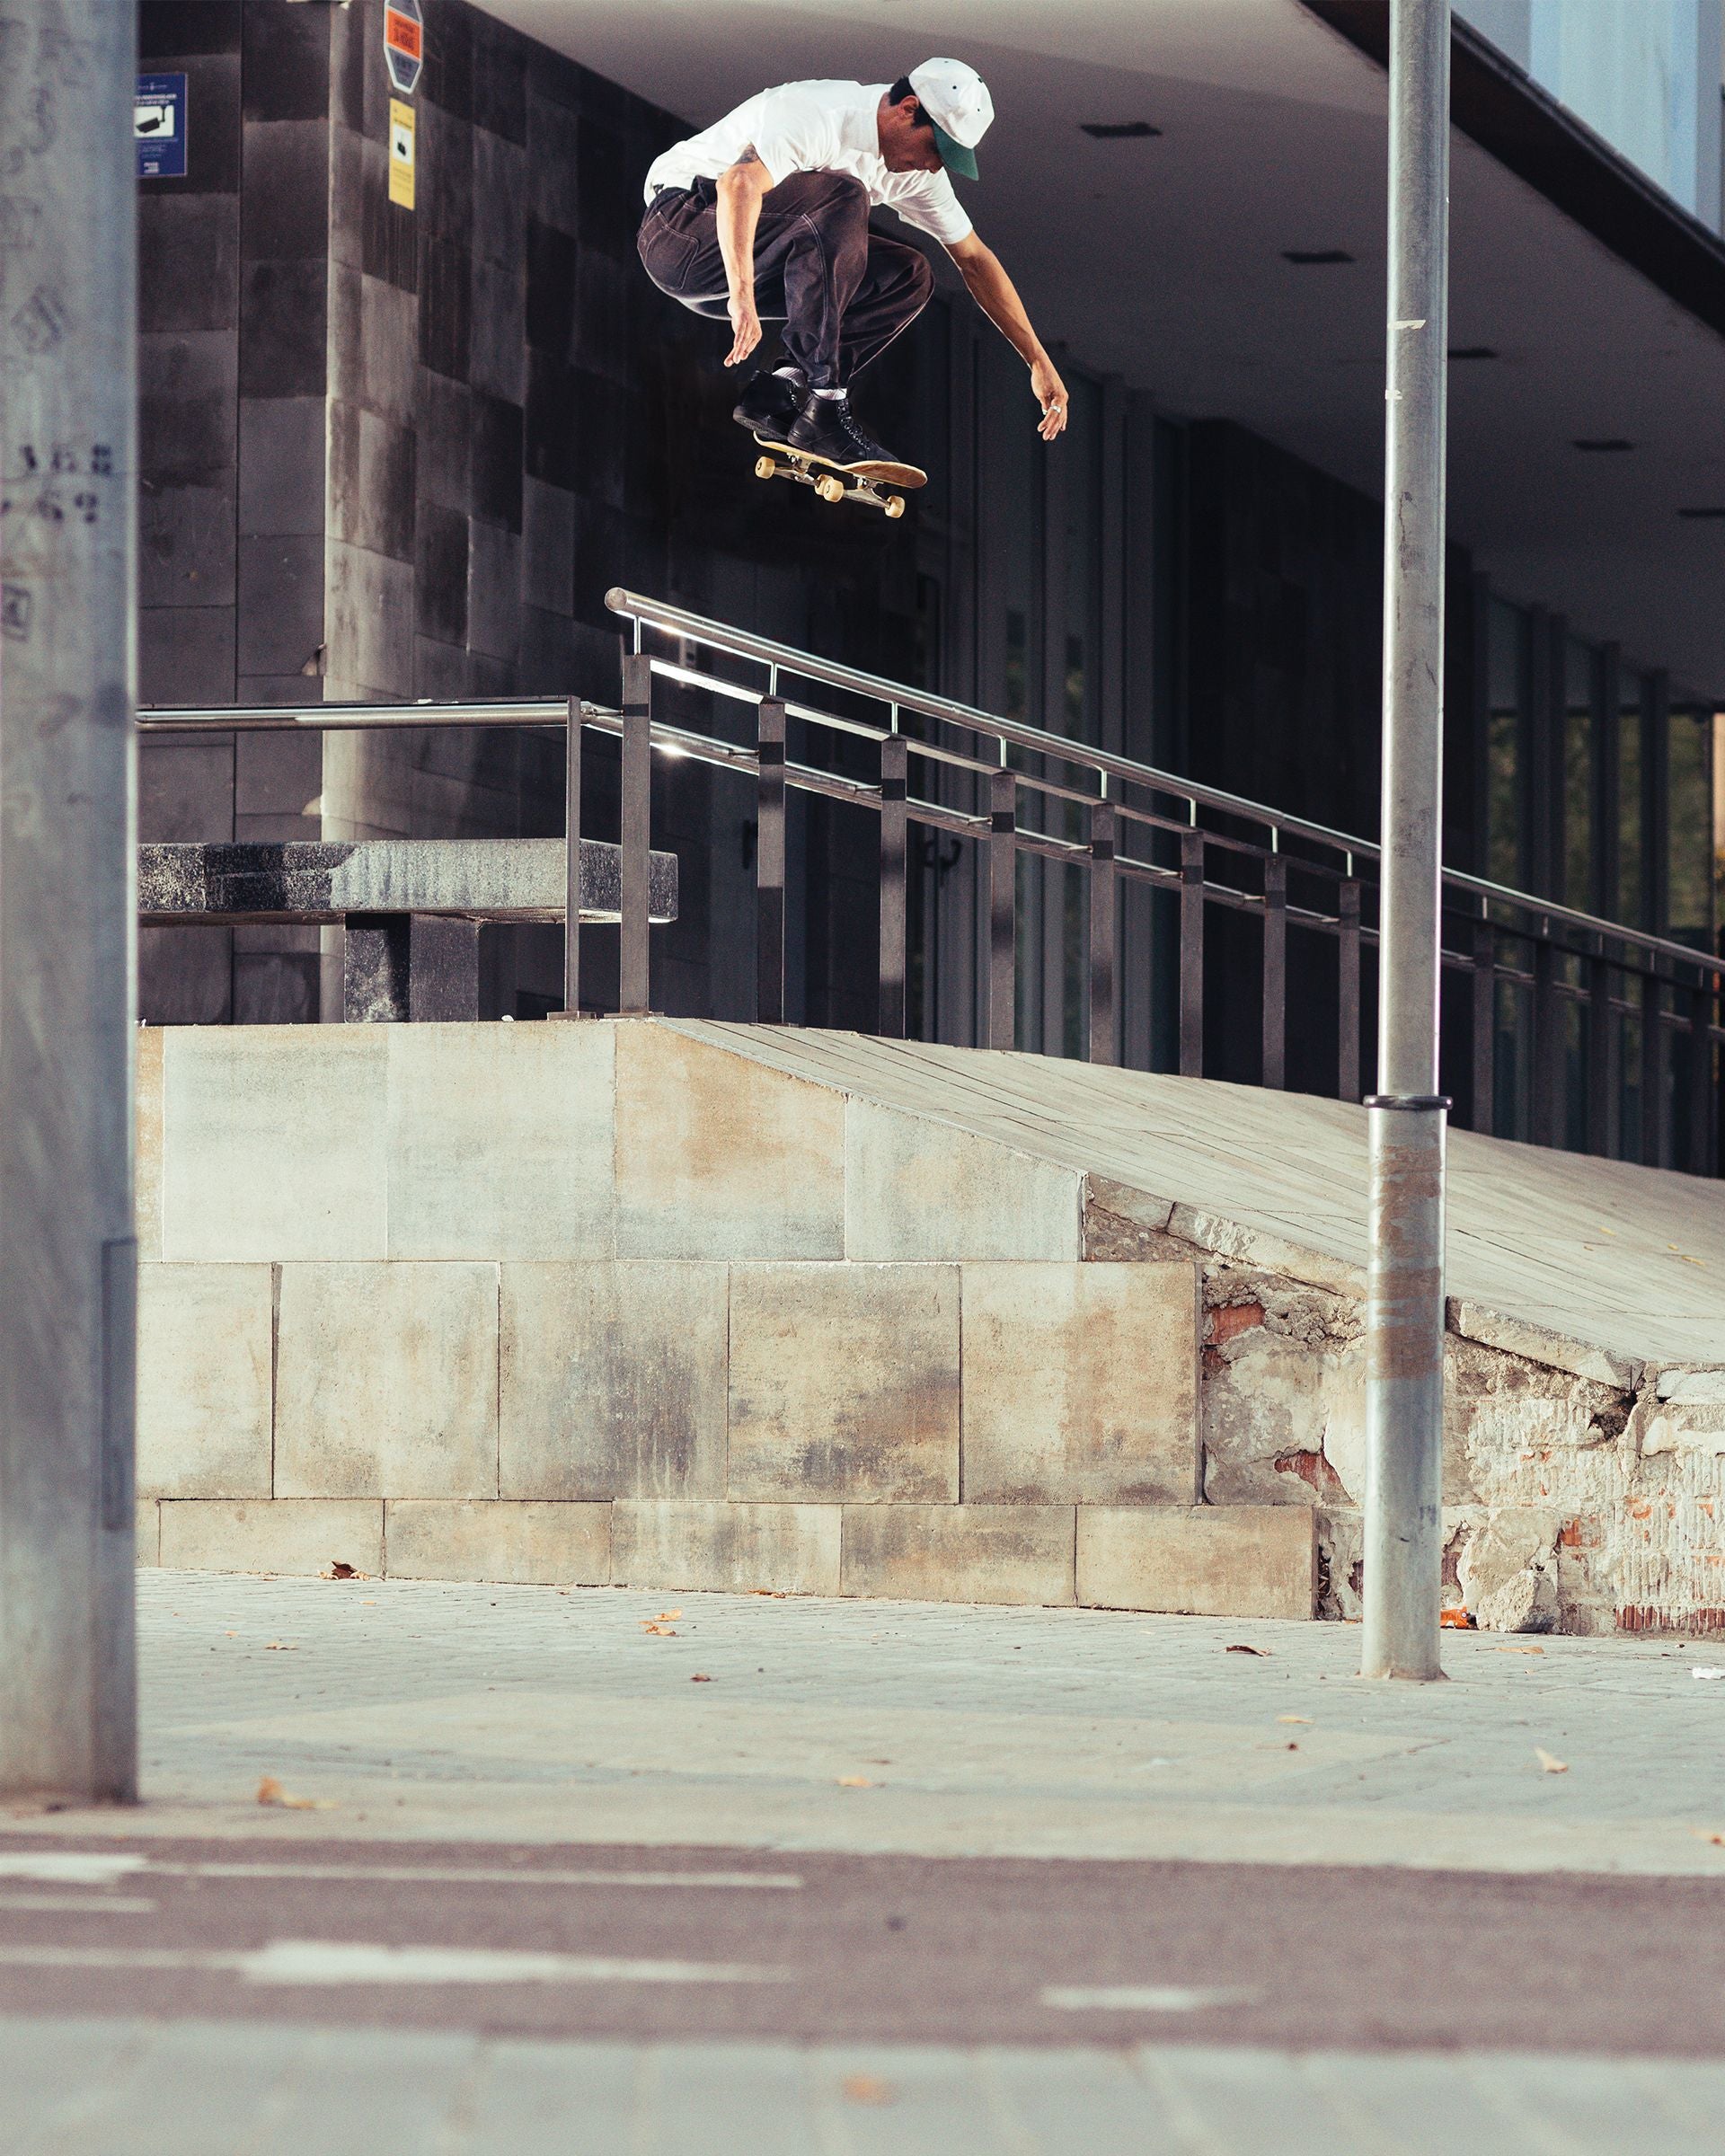 Sammy Montano wearing the Los Angered II Shoe